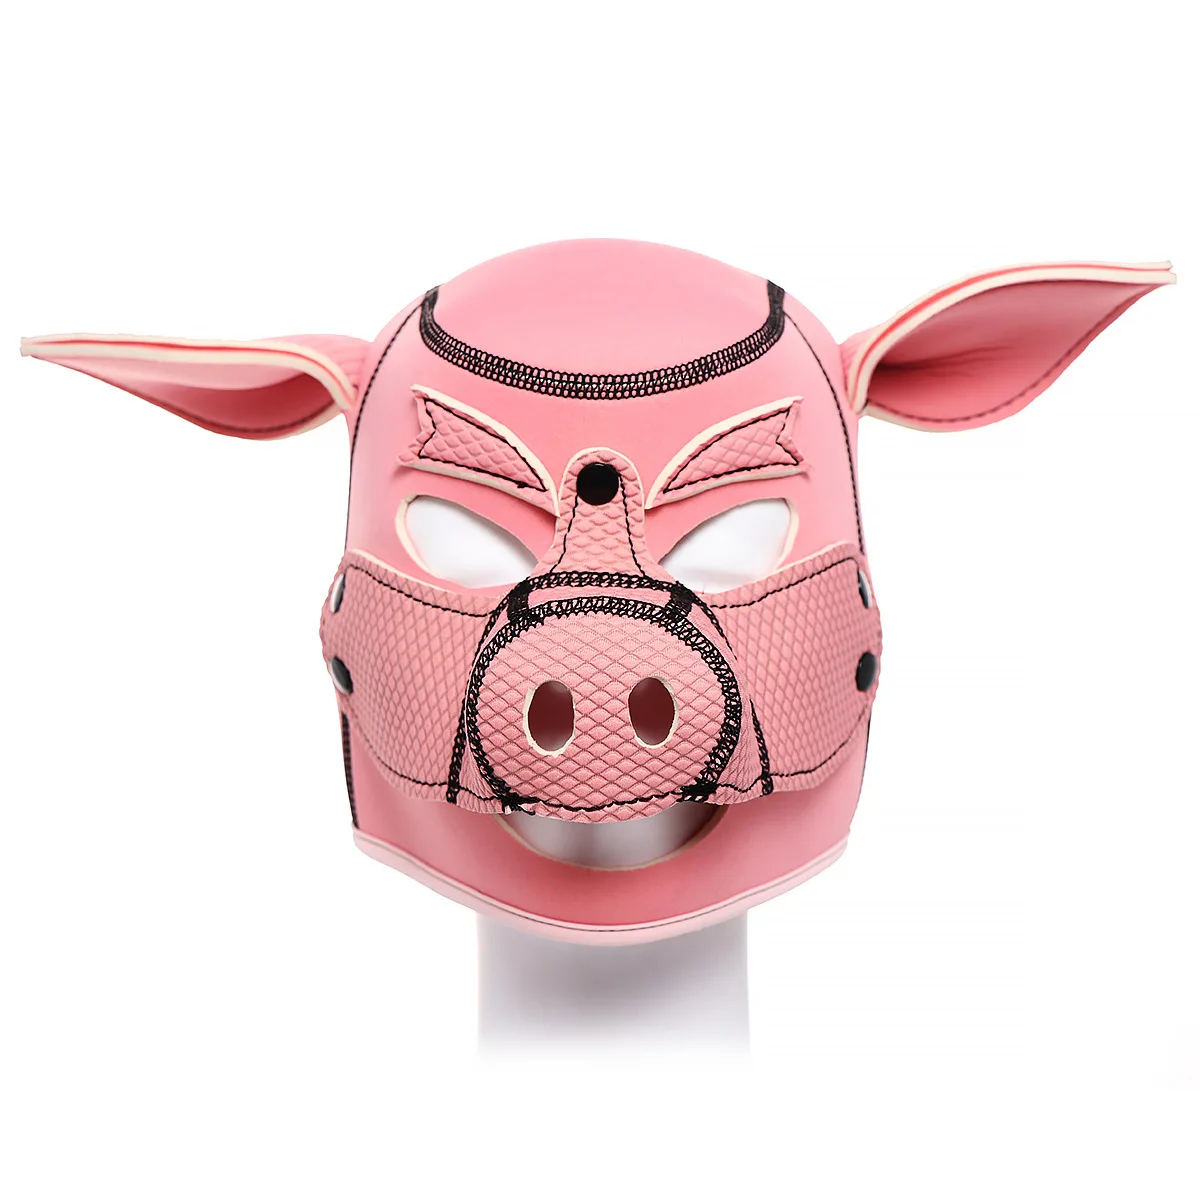 Pink Pig Head Masks Animales Masks Cosplay Halloween Mask Prop Party Carnival Mask Pig Head Mask Face Cover Pig Cosplay Sex Toys